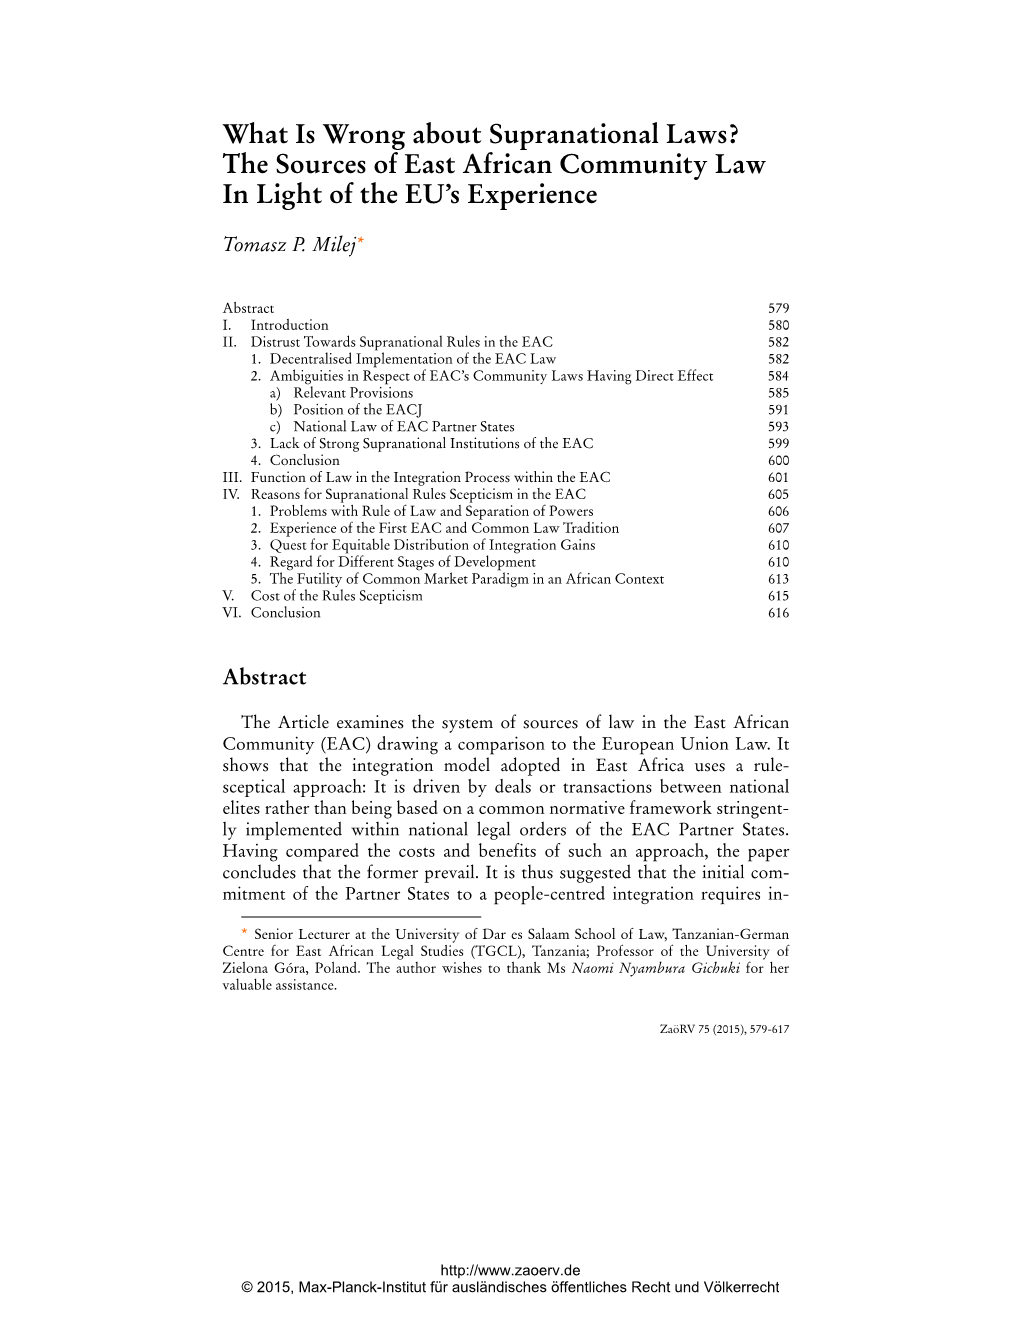 What Is Wrong About Supranational Laws? the Sources of East African Community Law in Light of the EU’S Experience